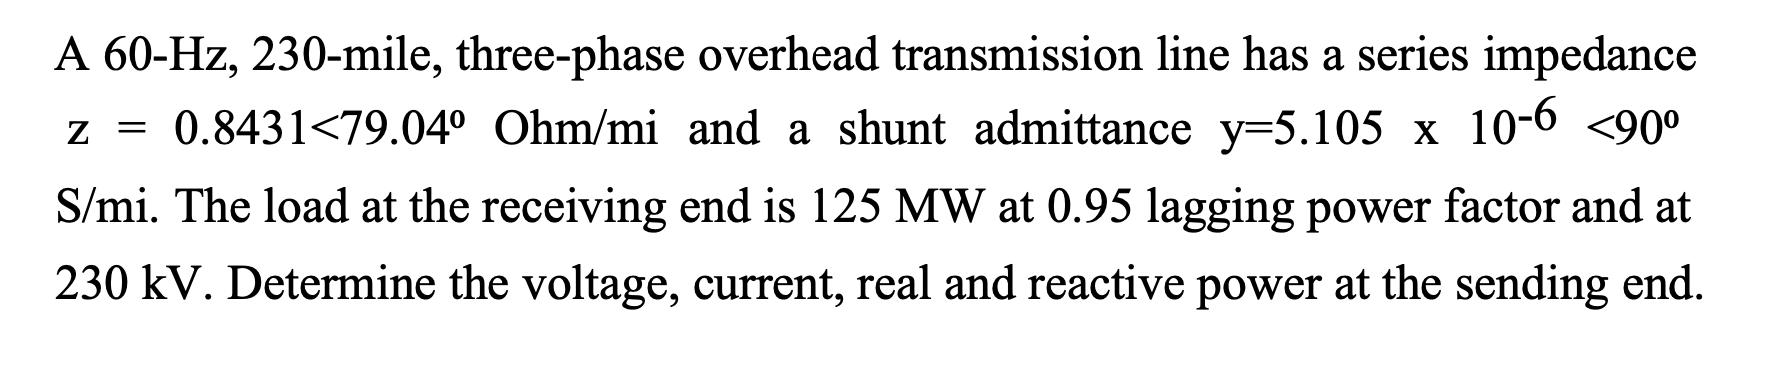 A 60-Hz, 230-mile, three-phase overhead transmission line has a series impedancez = 0.8431<79.04° Ohm/mi and a shunt admitta